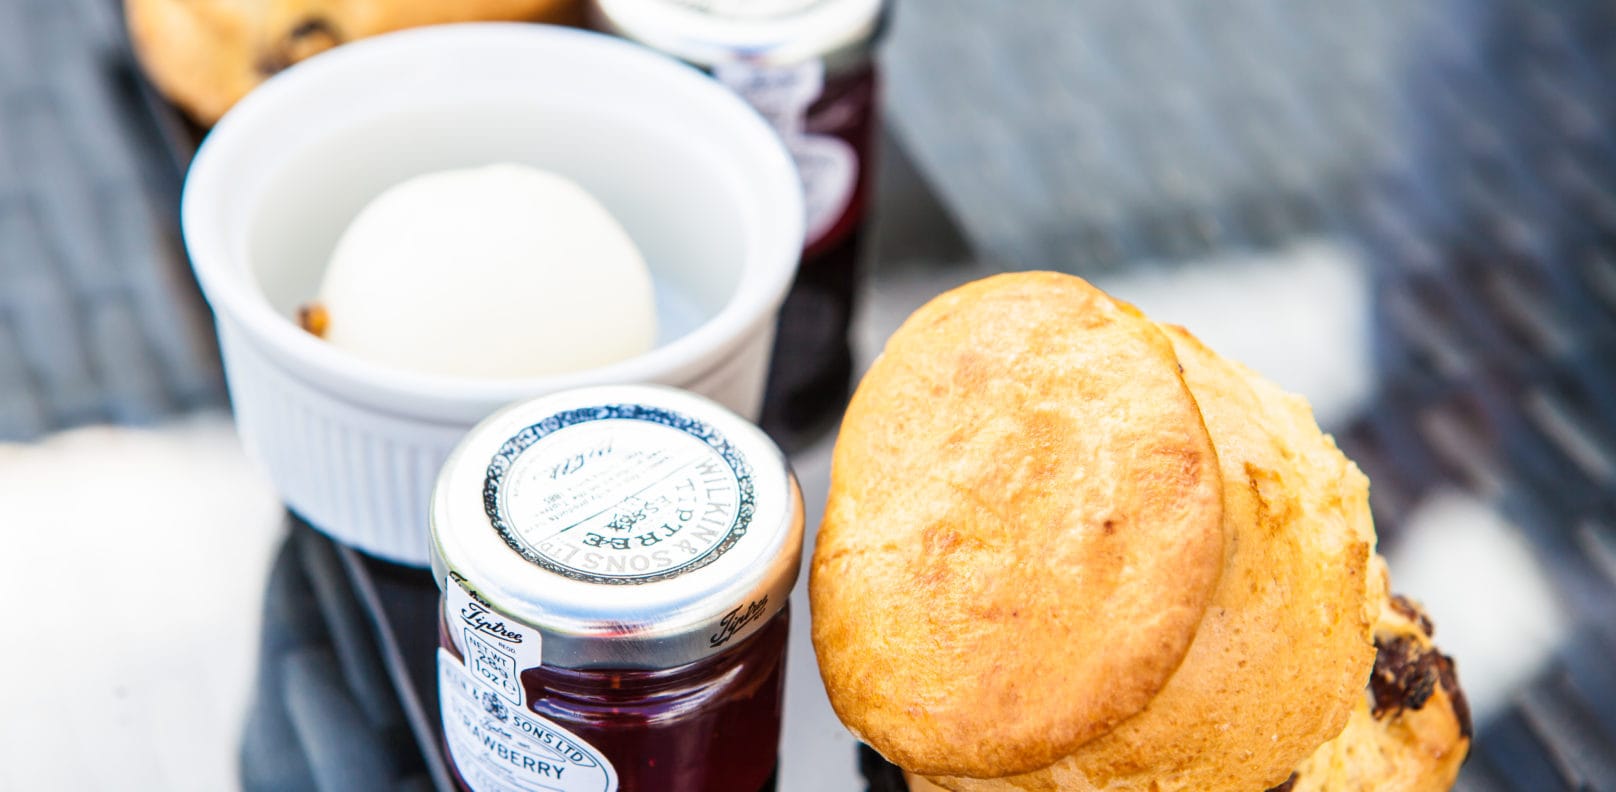 Afternoon Tea Scones and Jam